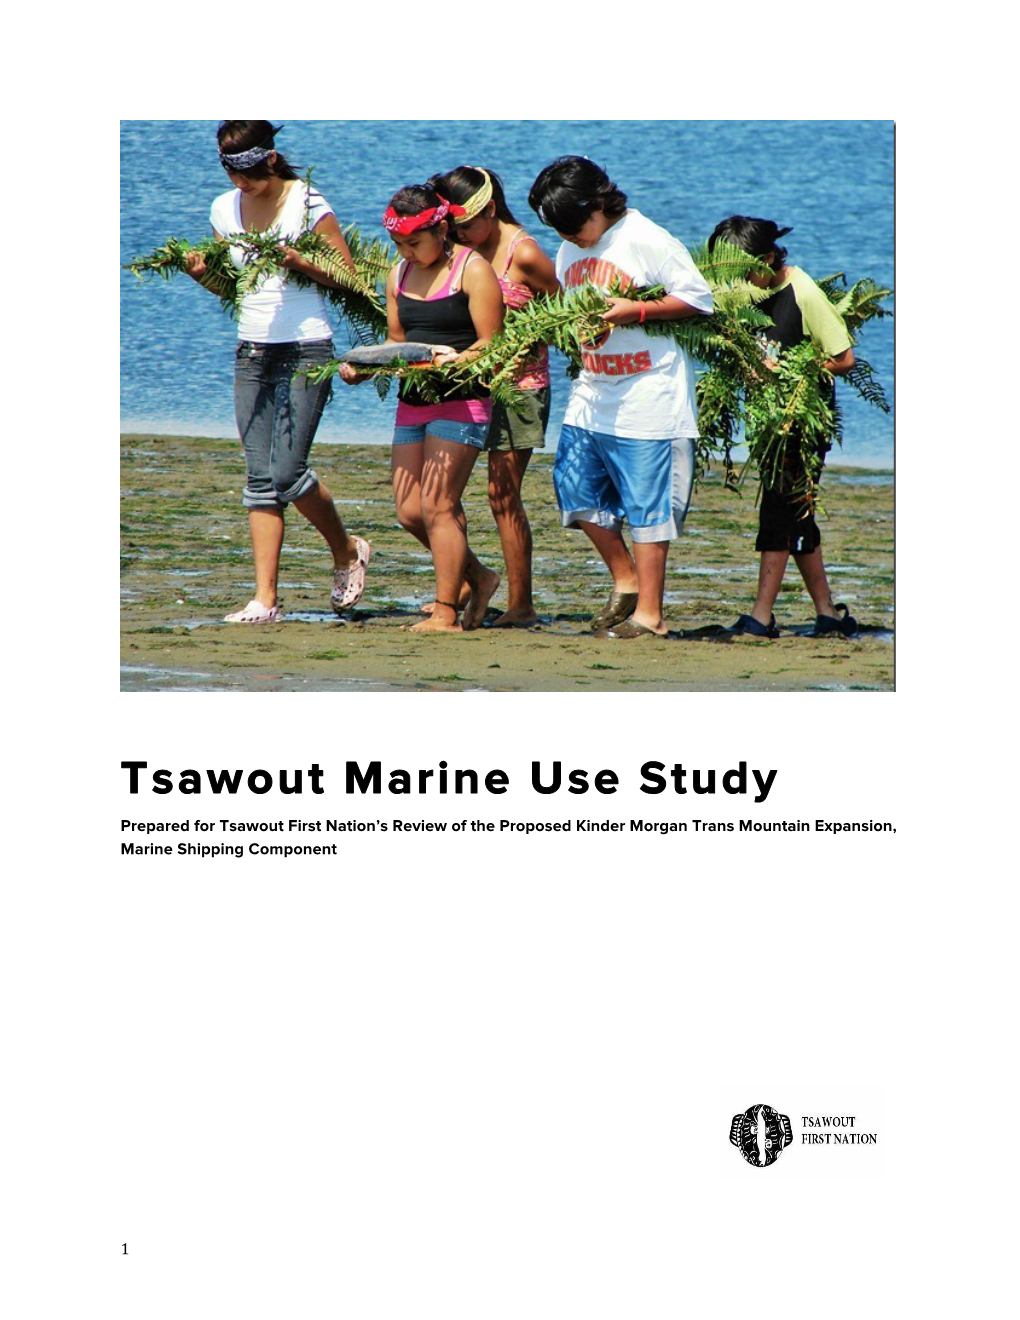 Tsawout Marine Use Study Prepared for Tsawout First Nation’S Review of the Proposed Kinder Morgan Trans Mountain Expansion, Marine Shipping Component